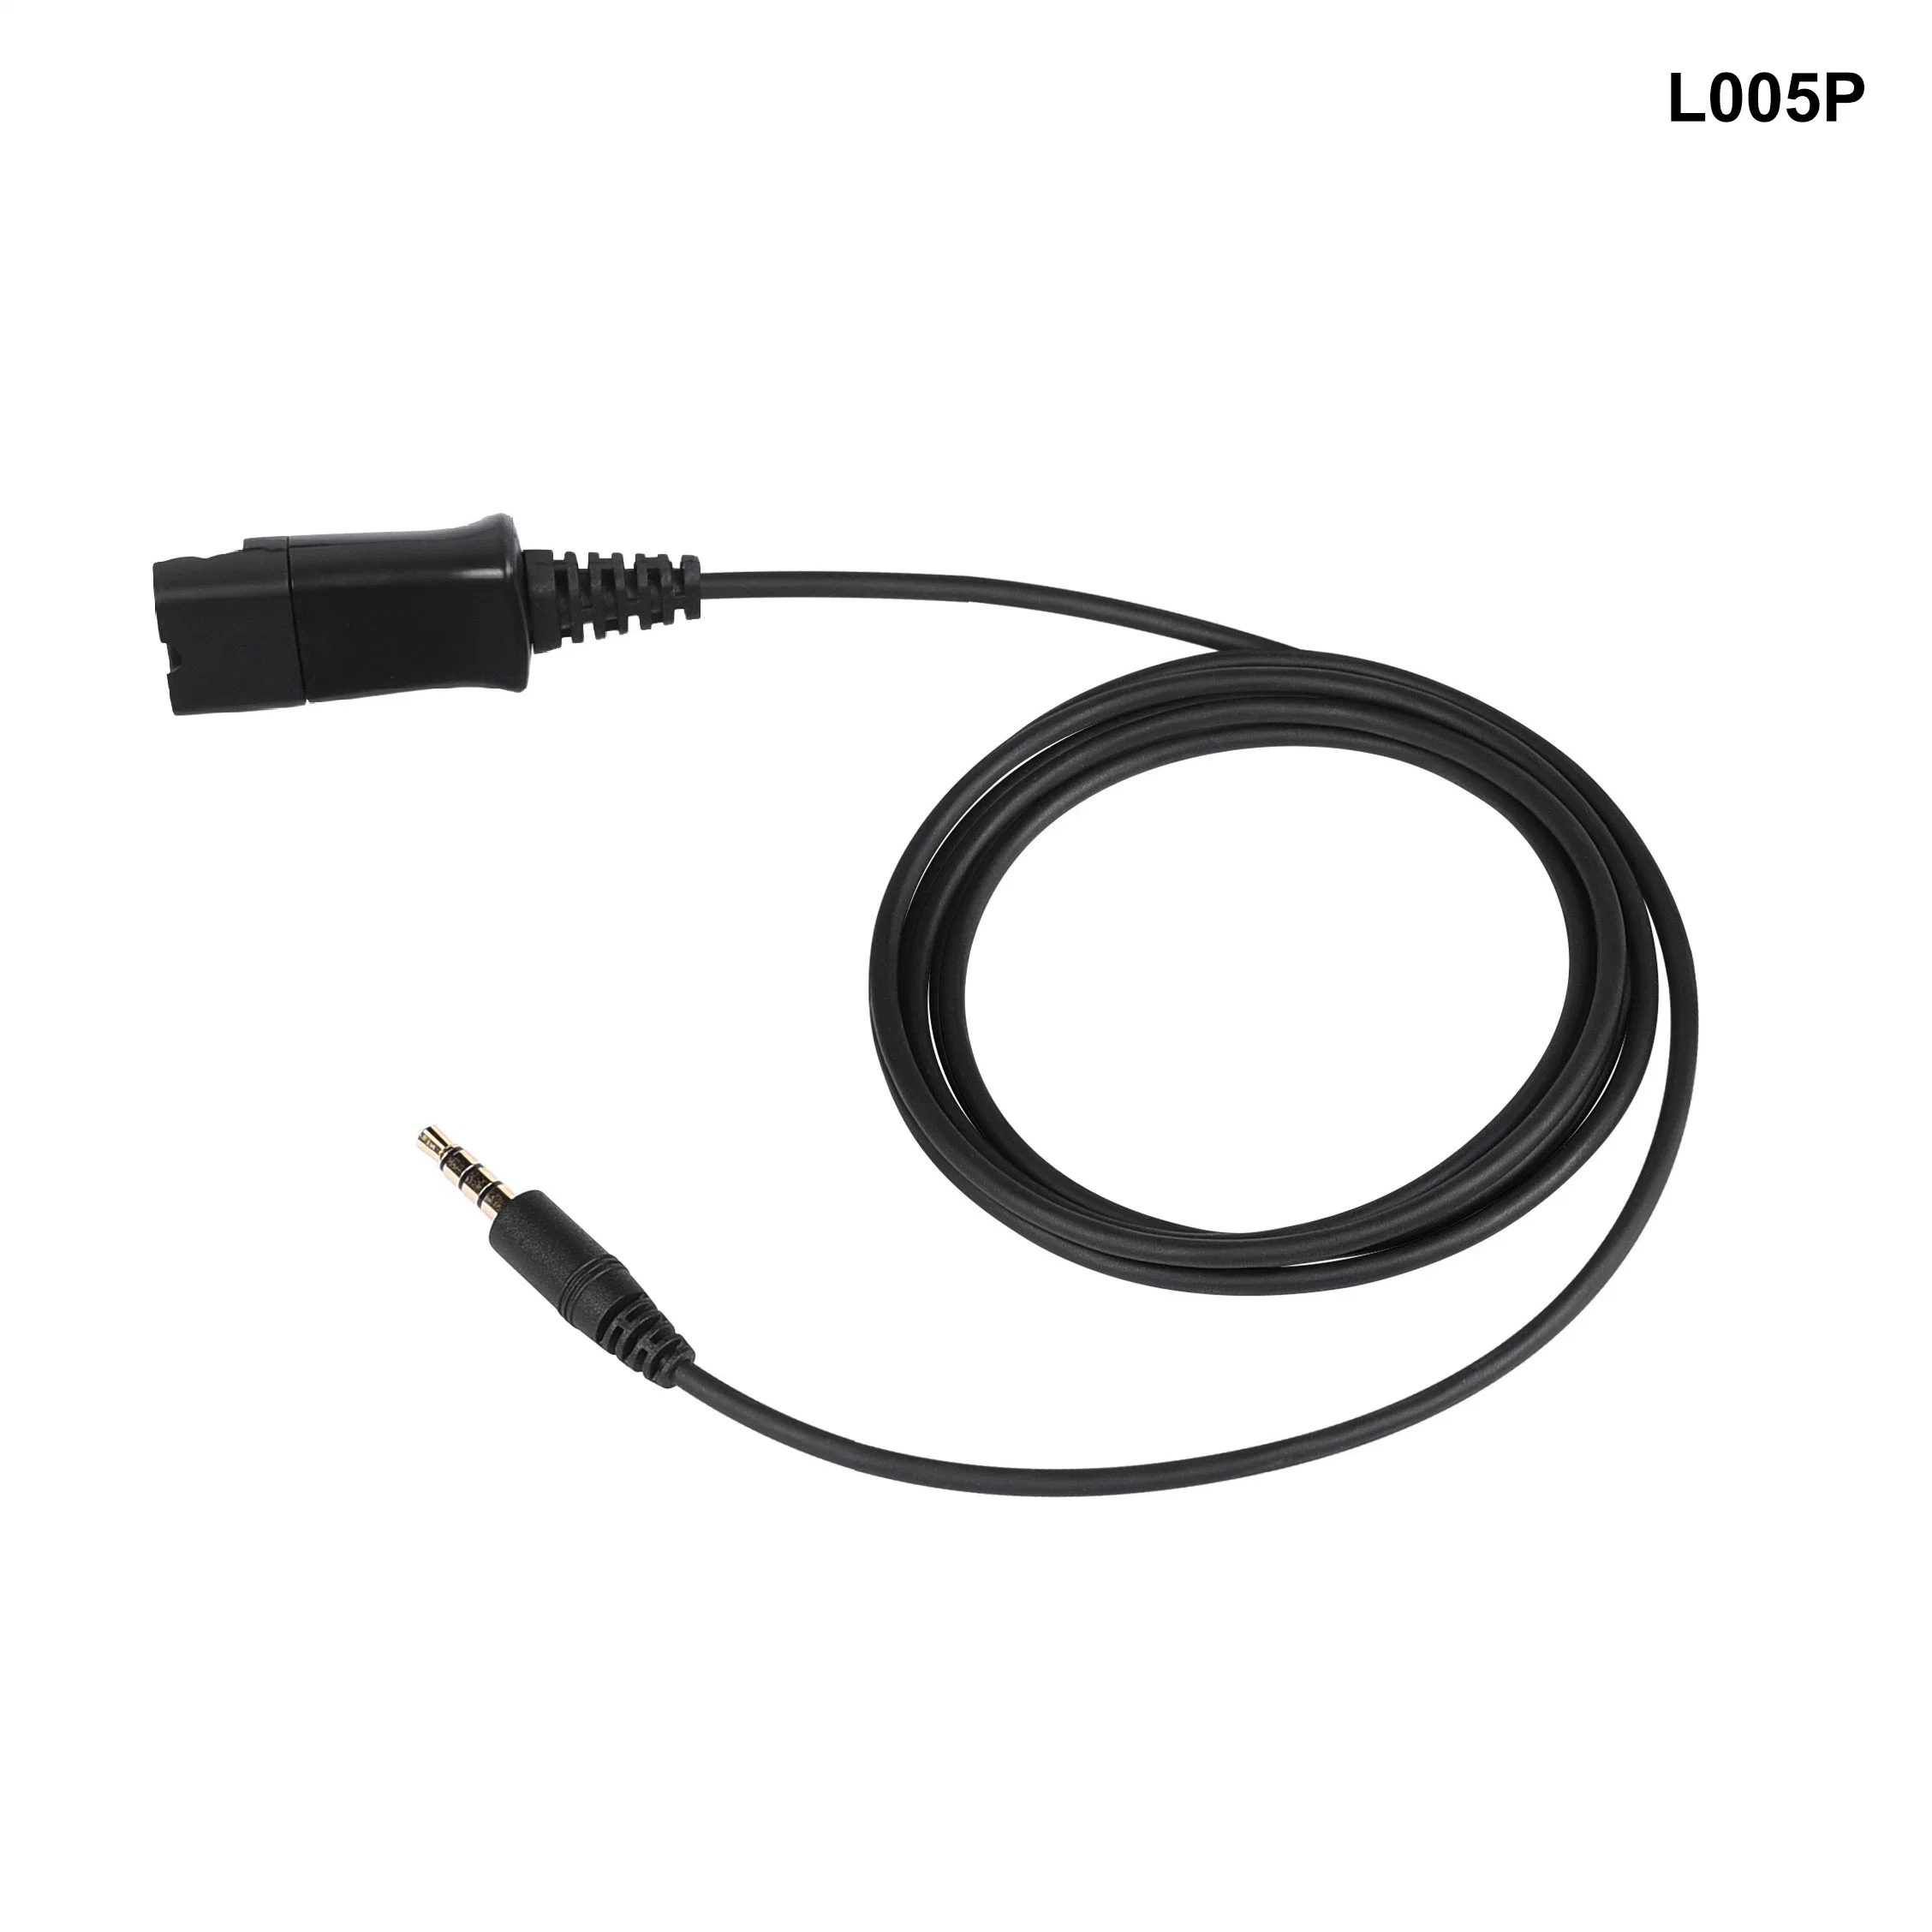 Qd Cable 3.5mm Stereo Audio Jack for Mobile Phones (4-pin)